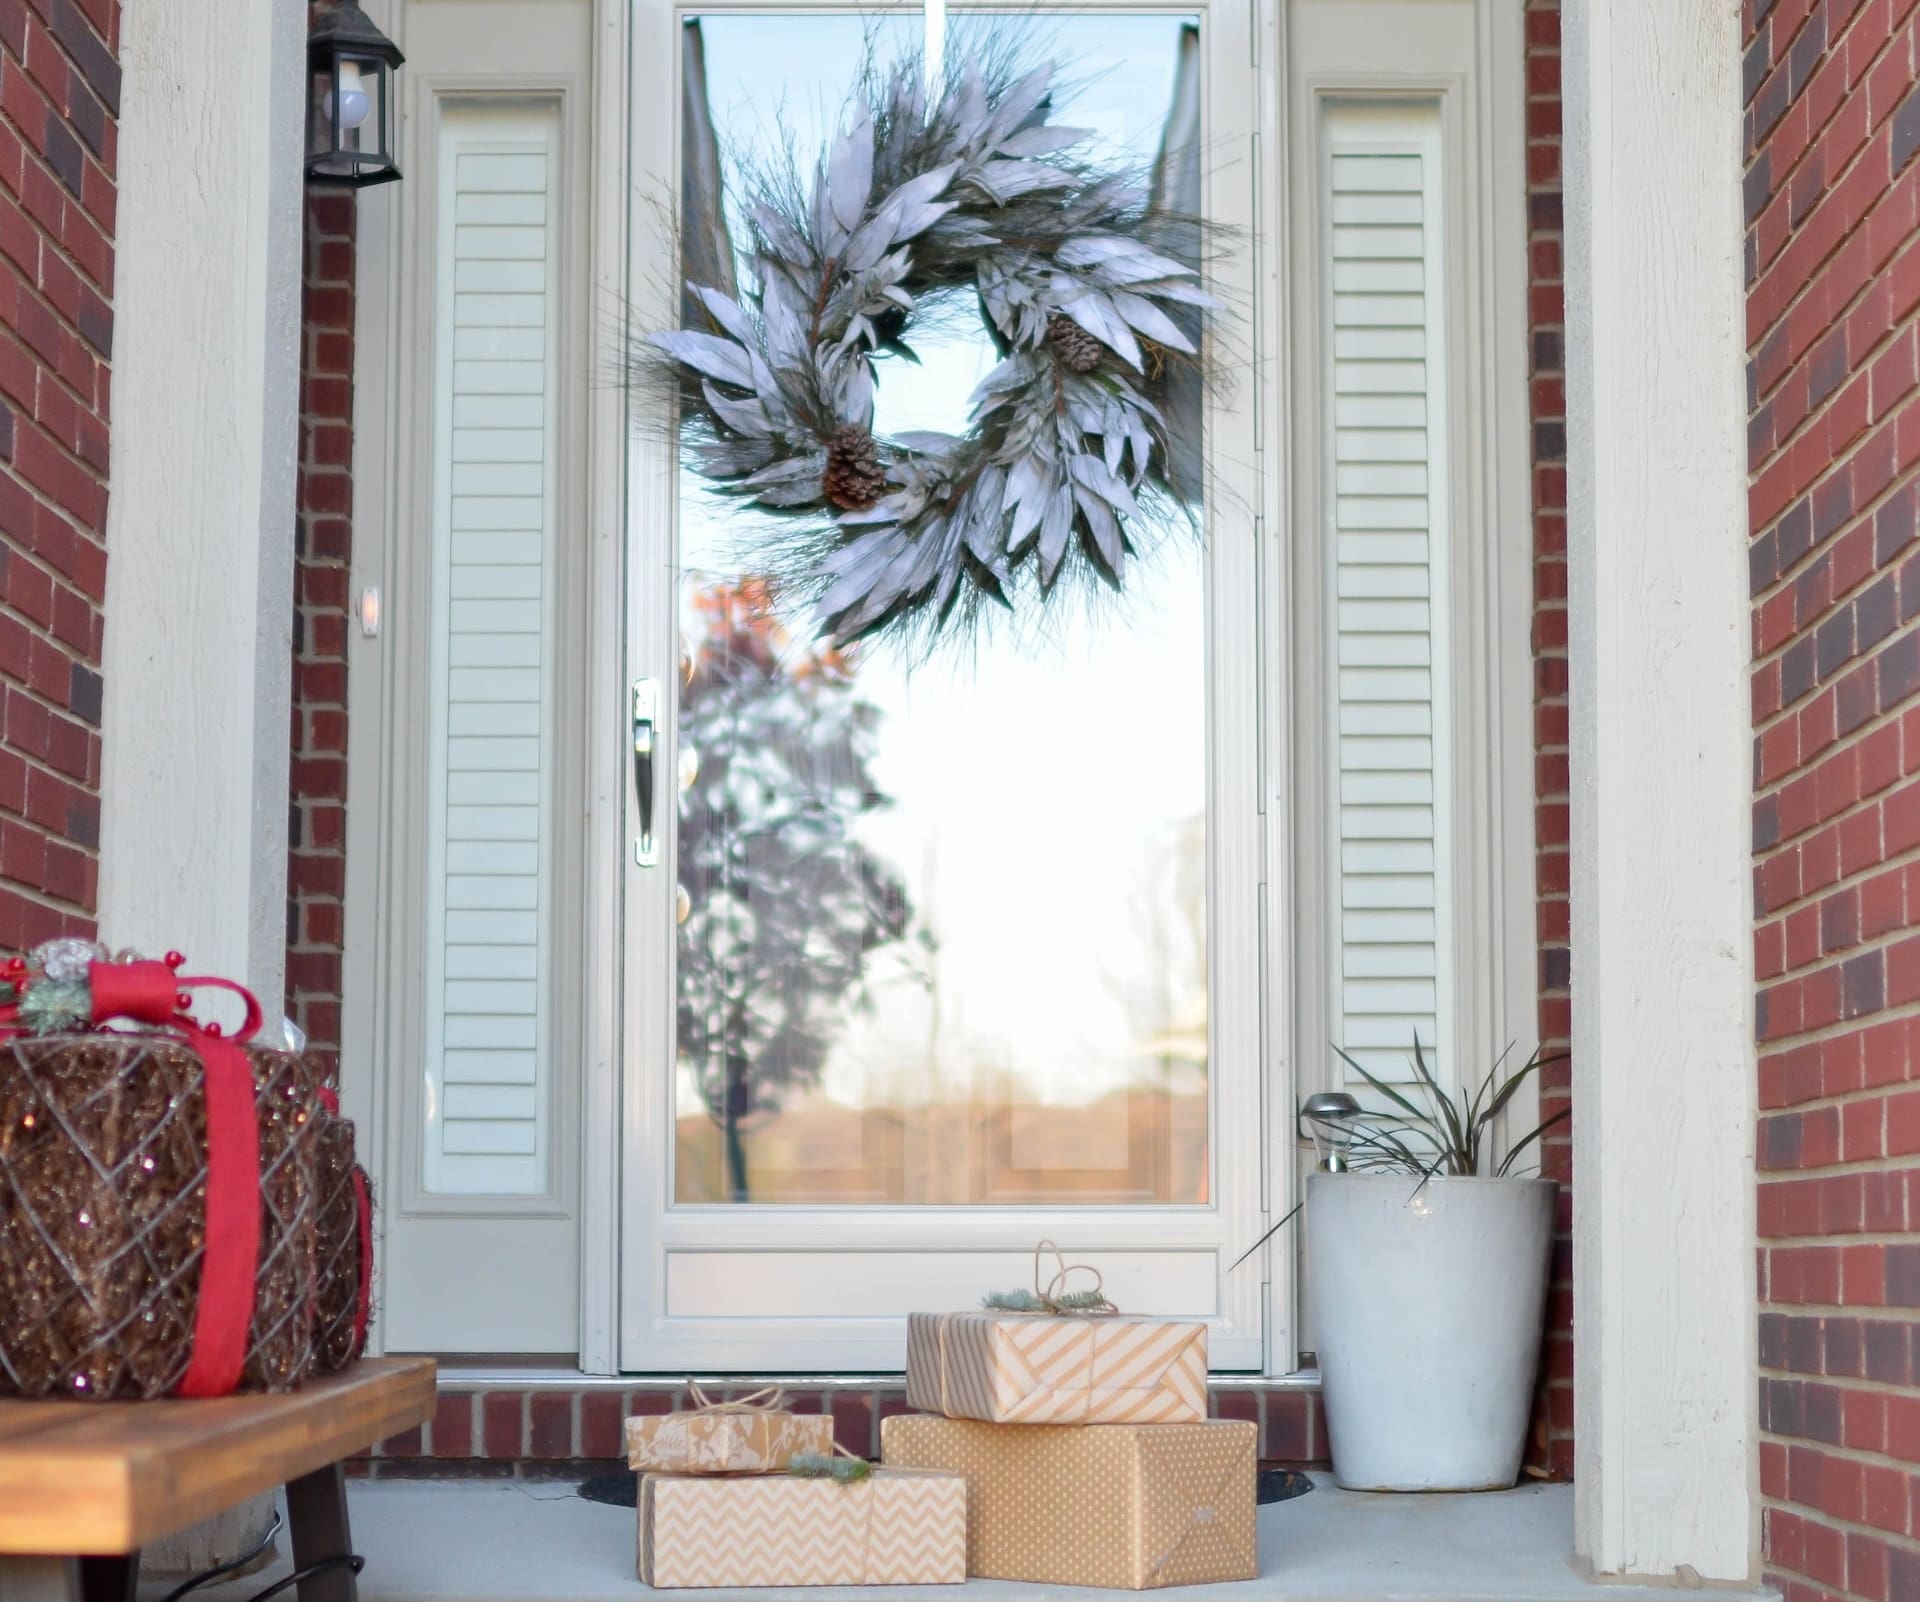 Featured image for “Worried about porch pirates? Here’s what to do”